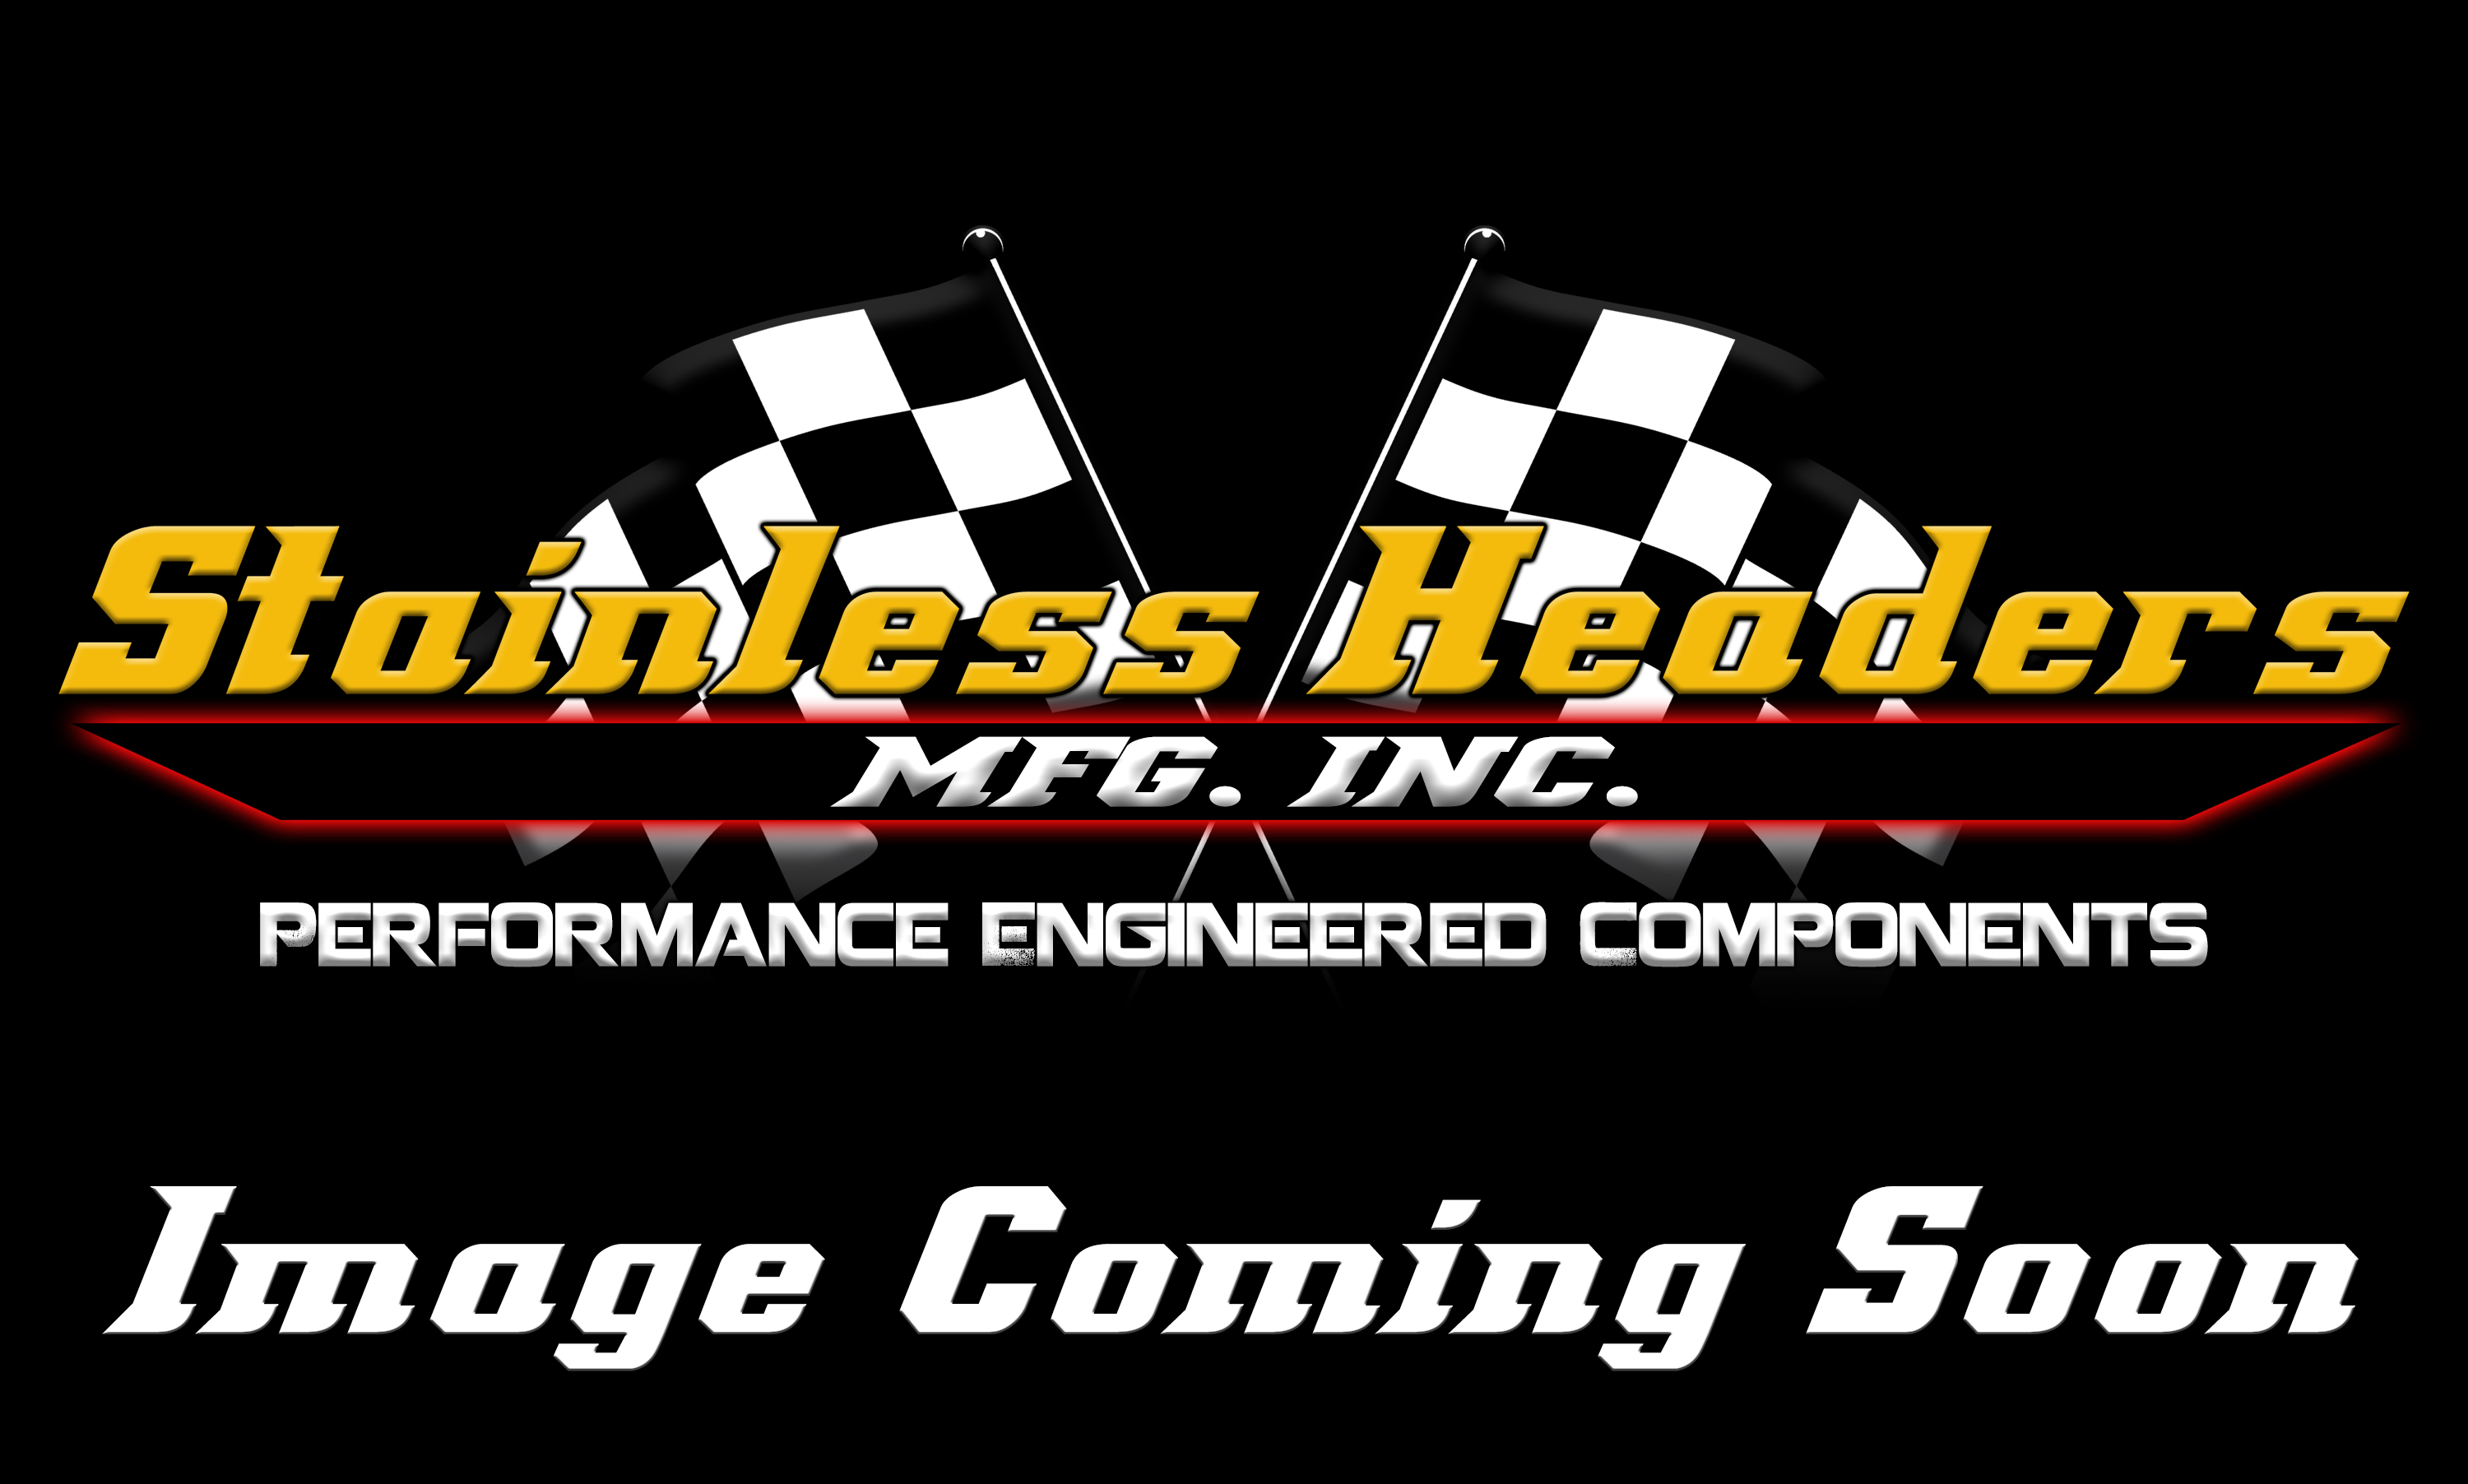 Stainless Headers - 1 1/2" Primary 4 into 1 Performance Merge Collector-16ga Mild Steel